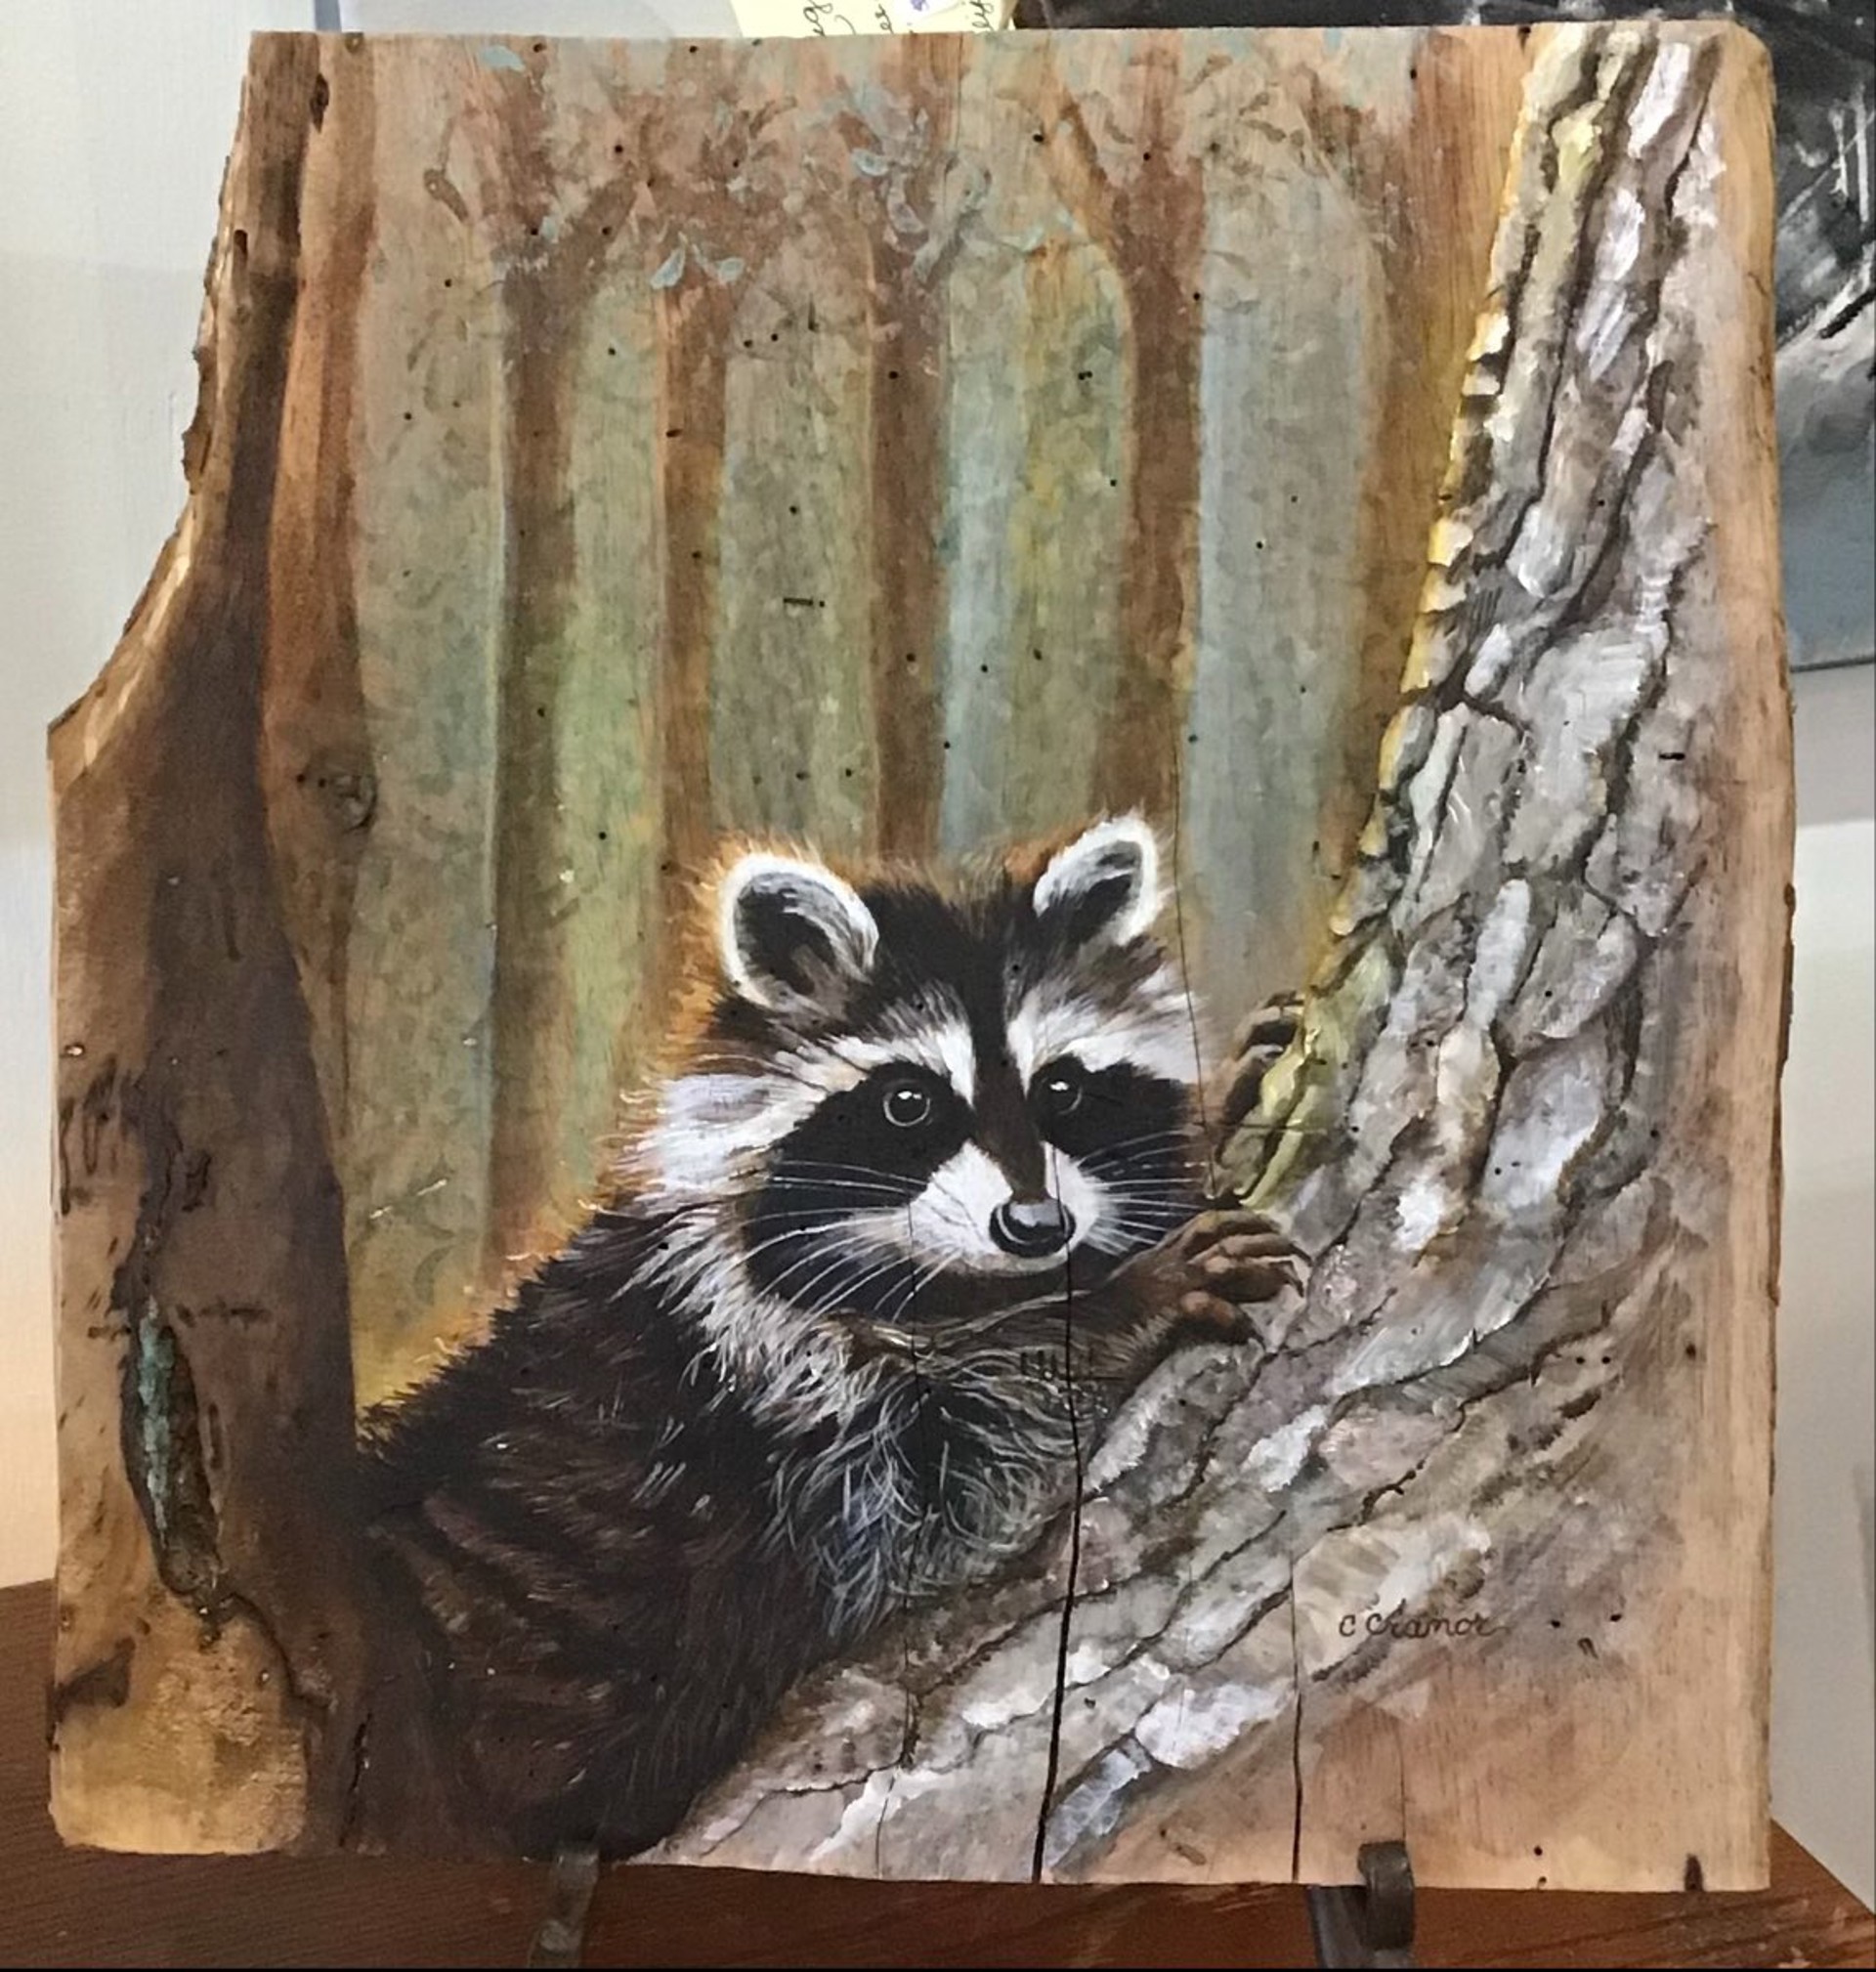 Intently Watching Raccoon by Cindy Cranor